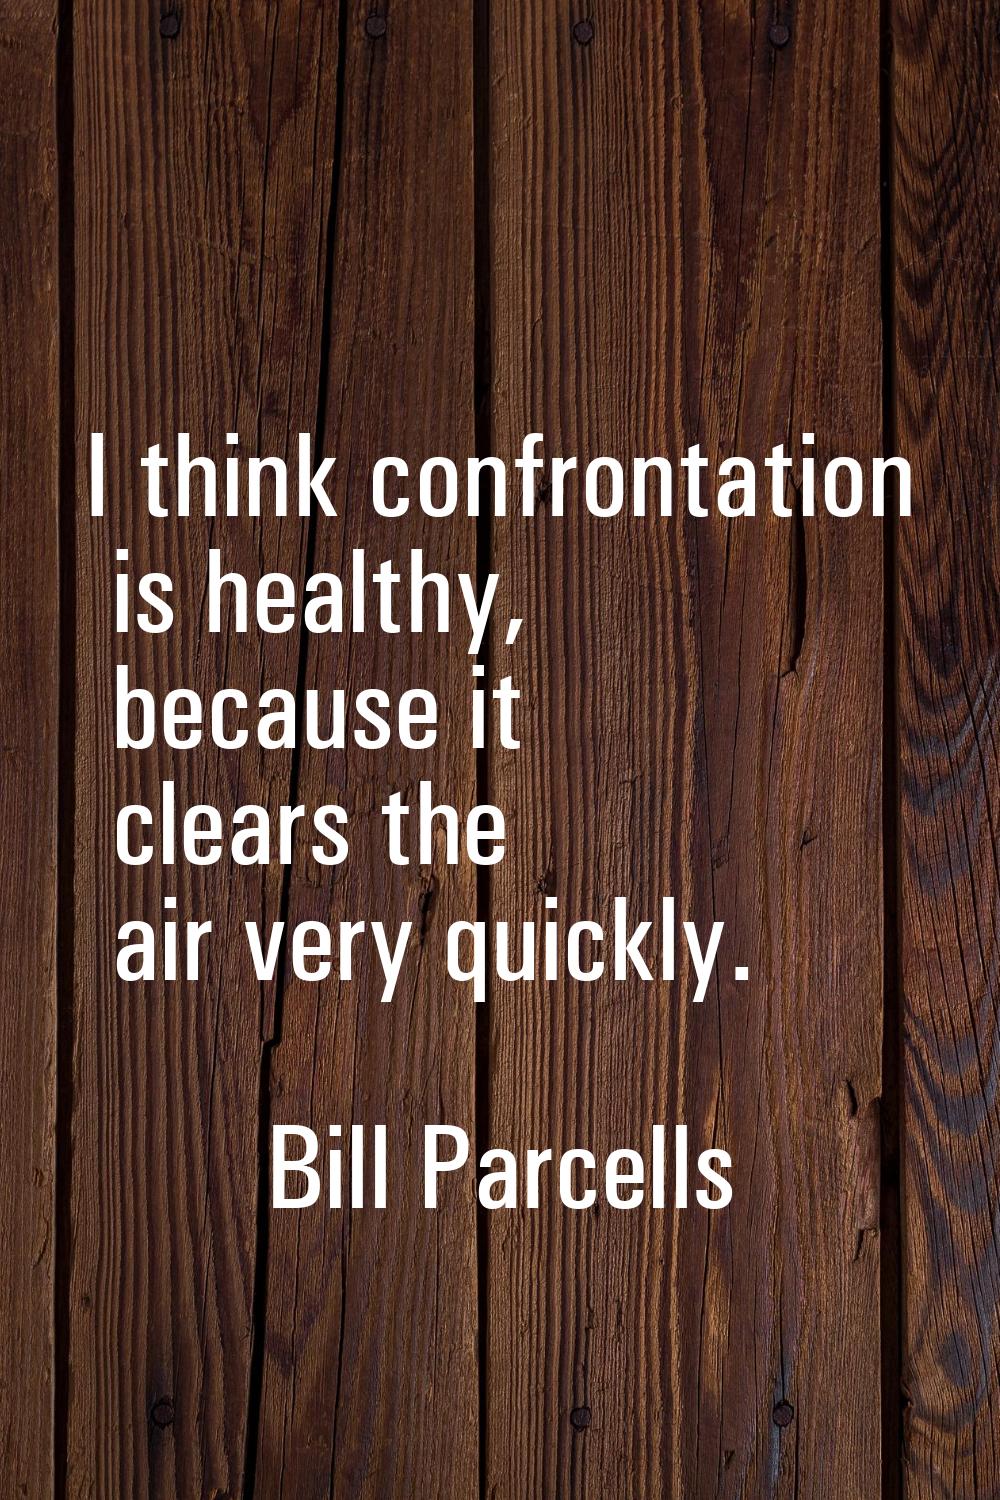 I think confrontation is healthy, because it clears the air very quickly.